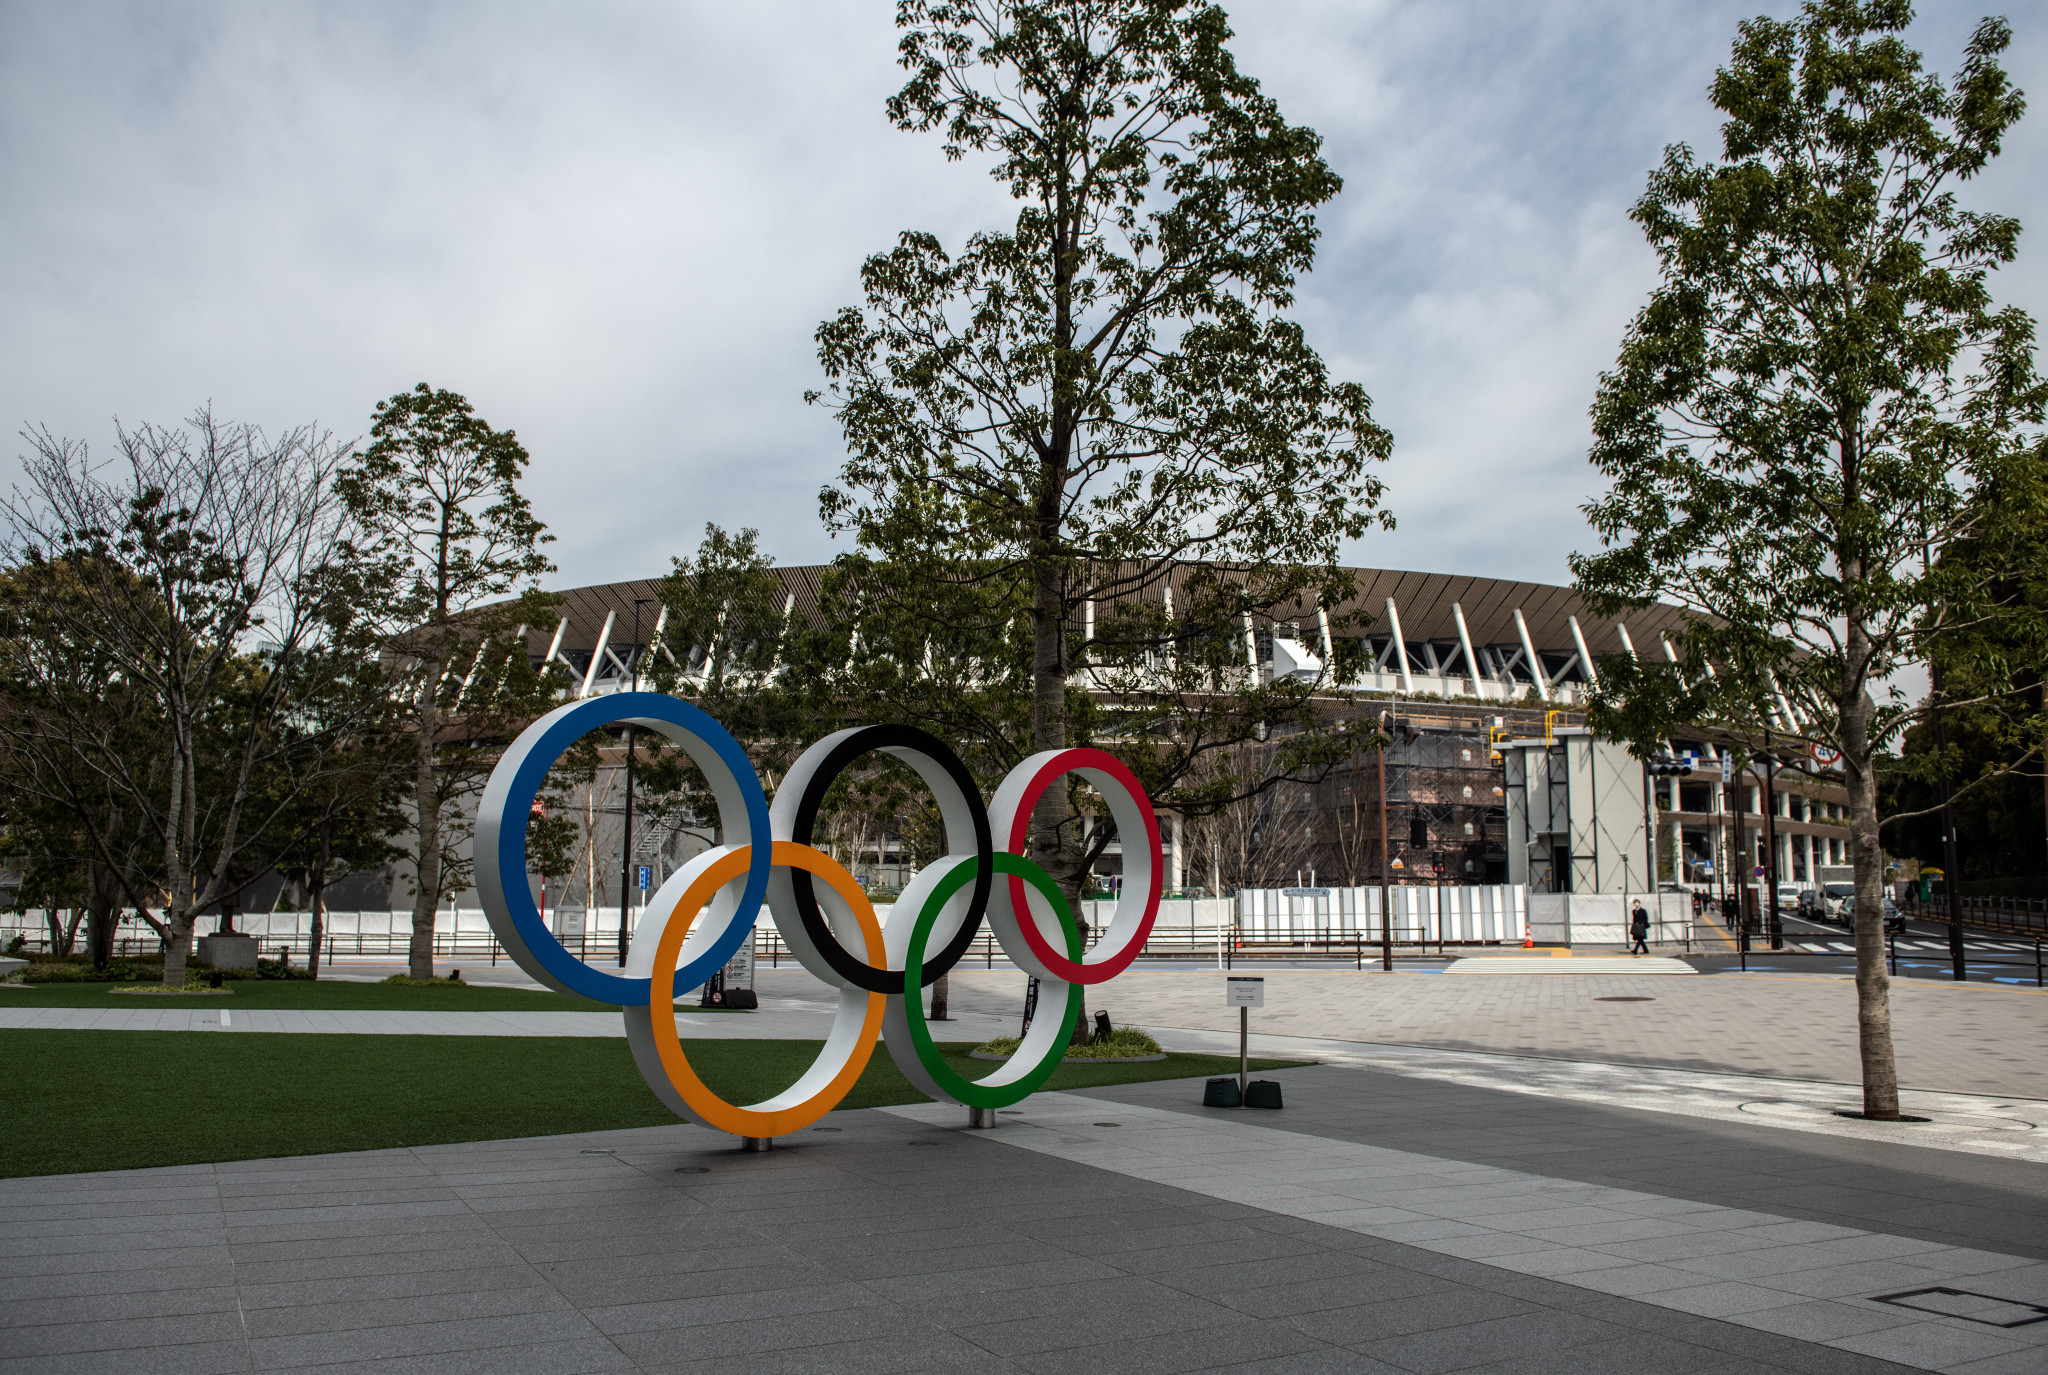 Tokyo 2020 and the IOC have repeatedly insisted the Games will go ahead despite the outbreak ©Getty Images